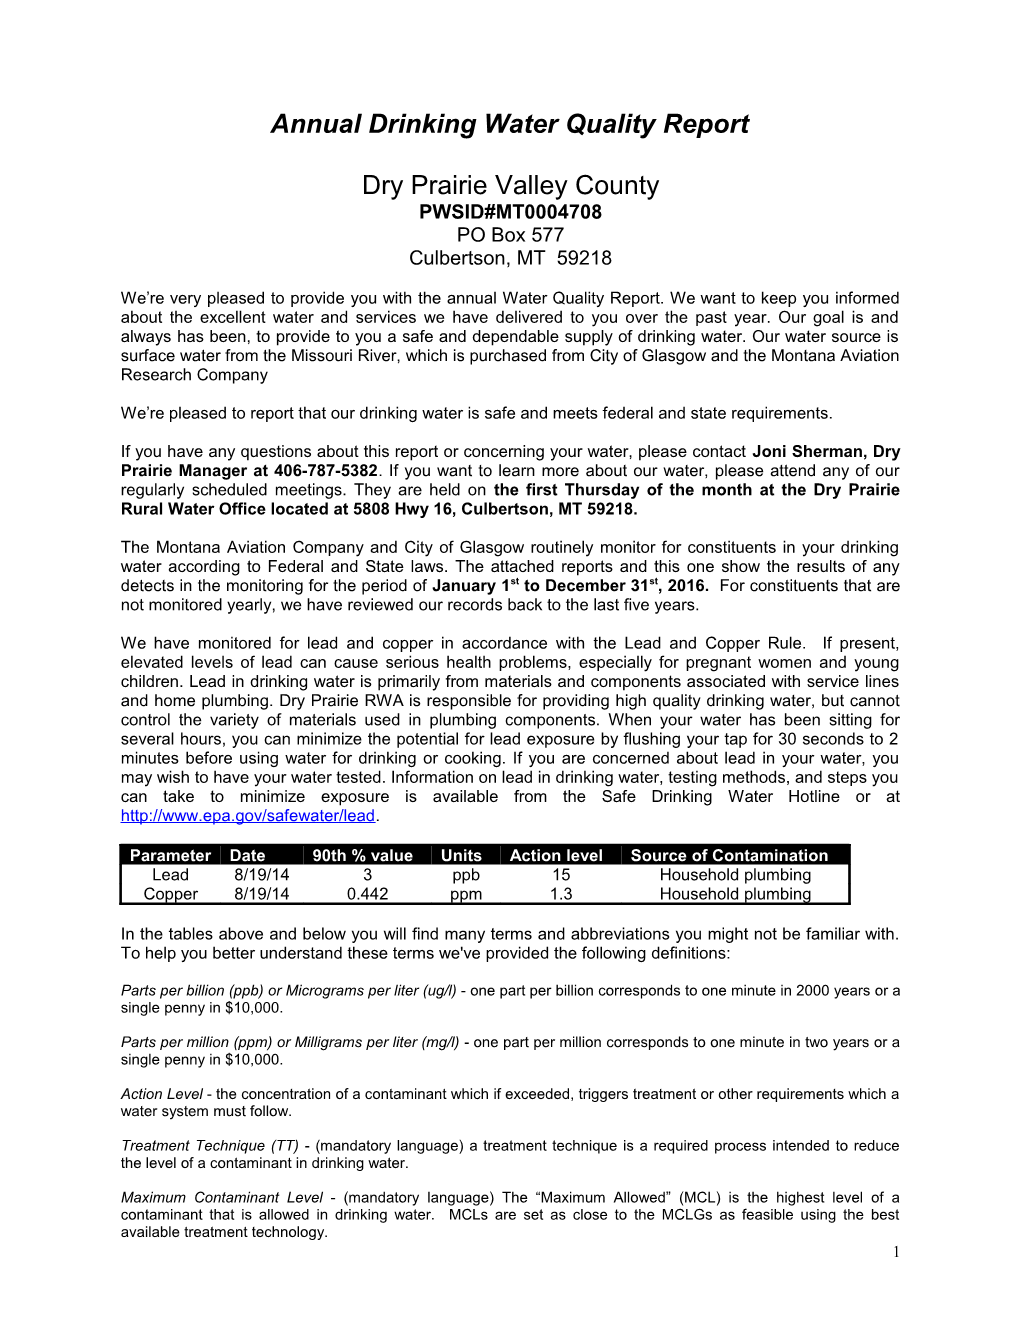 1998 Annual Drinking Water Quality Report